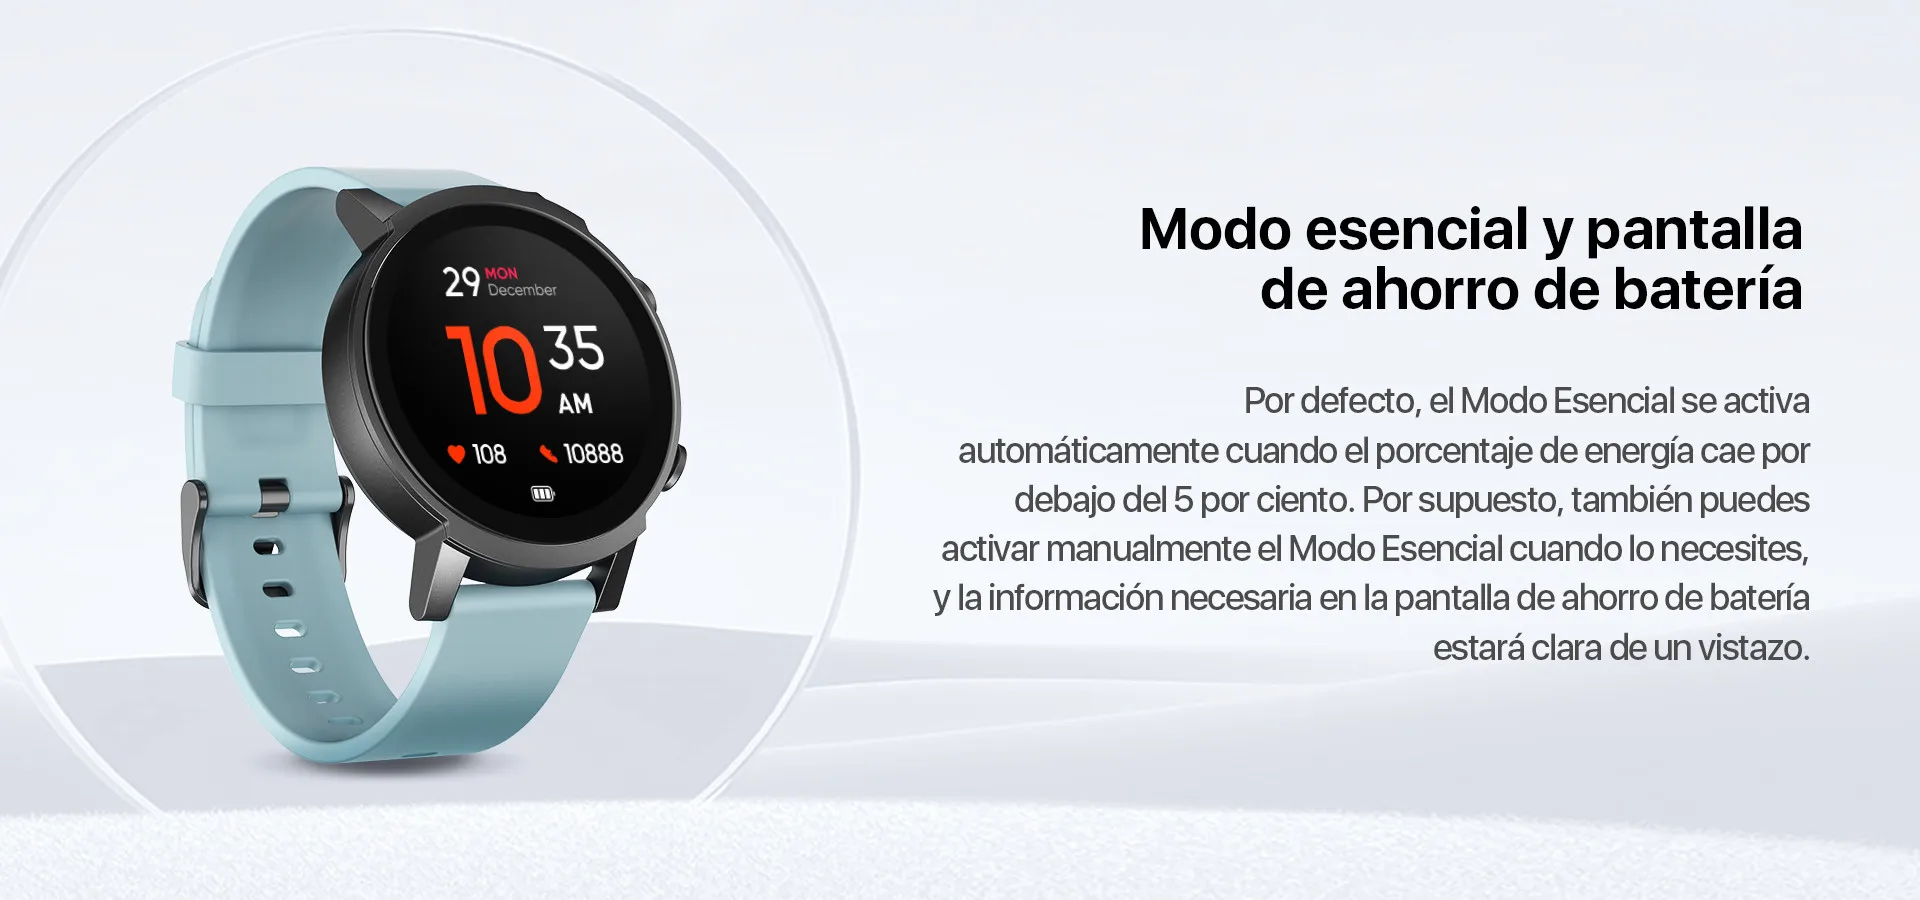 Ticwatch E3 Wear OS Smartwatch para hombres y mujeres Snapdragon 4100 8GB  ROM IP68 Impermeable Google Pay Compatible con iOS y Android